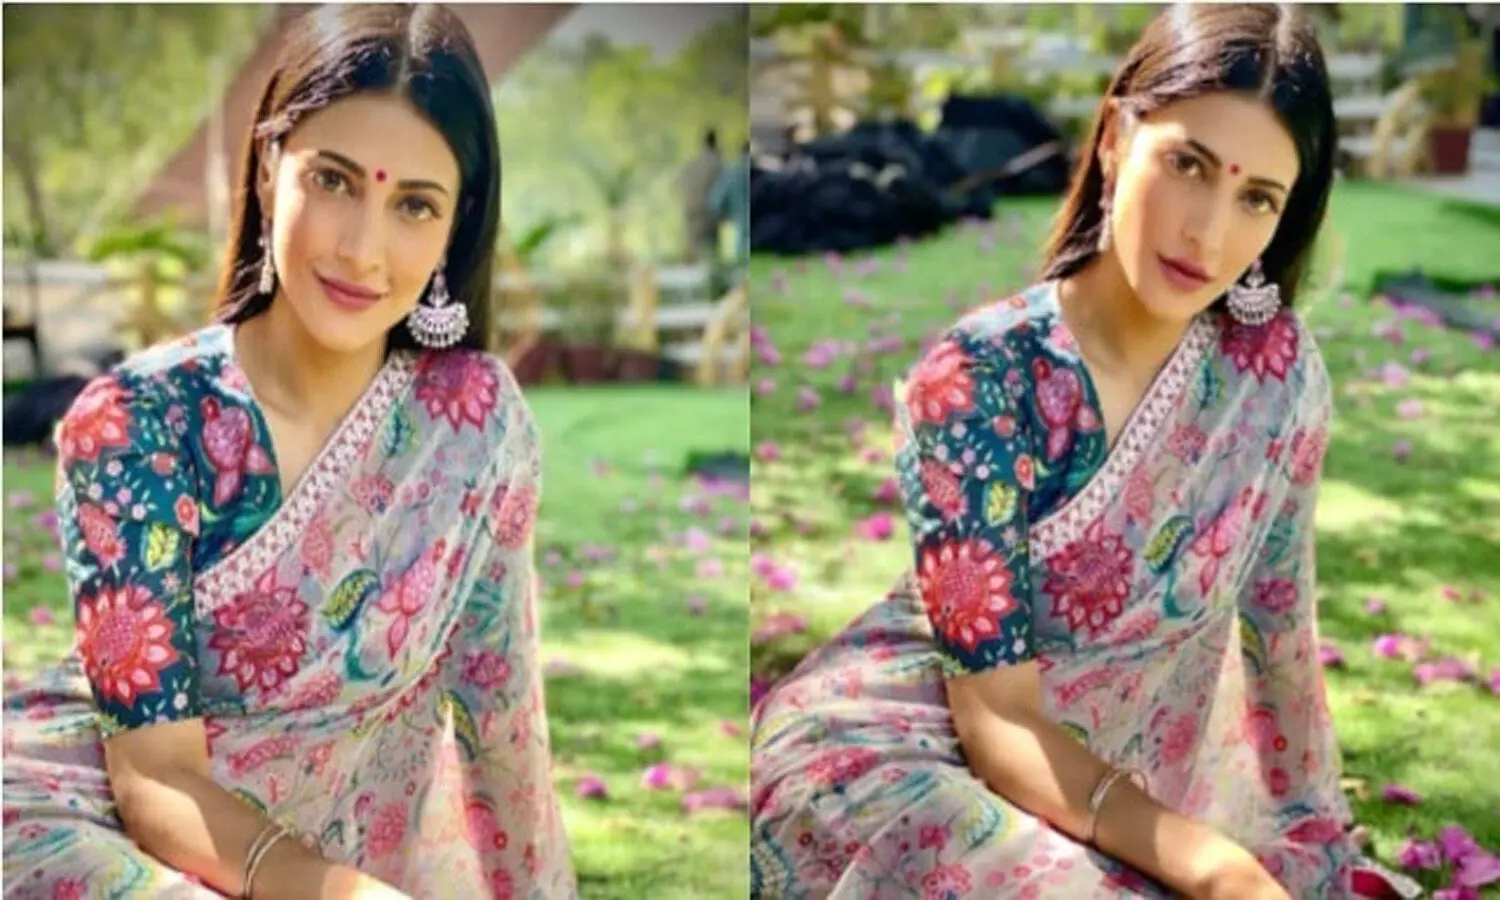 Shruti Haasan switches from sweatpants to saree; fans say oye hoye